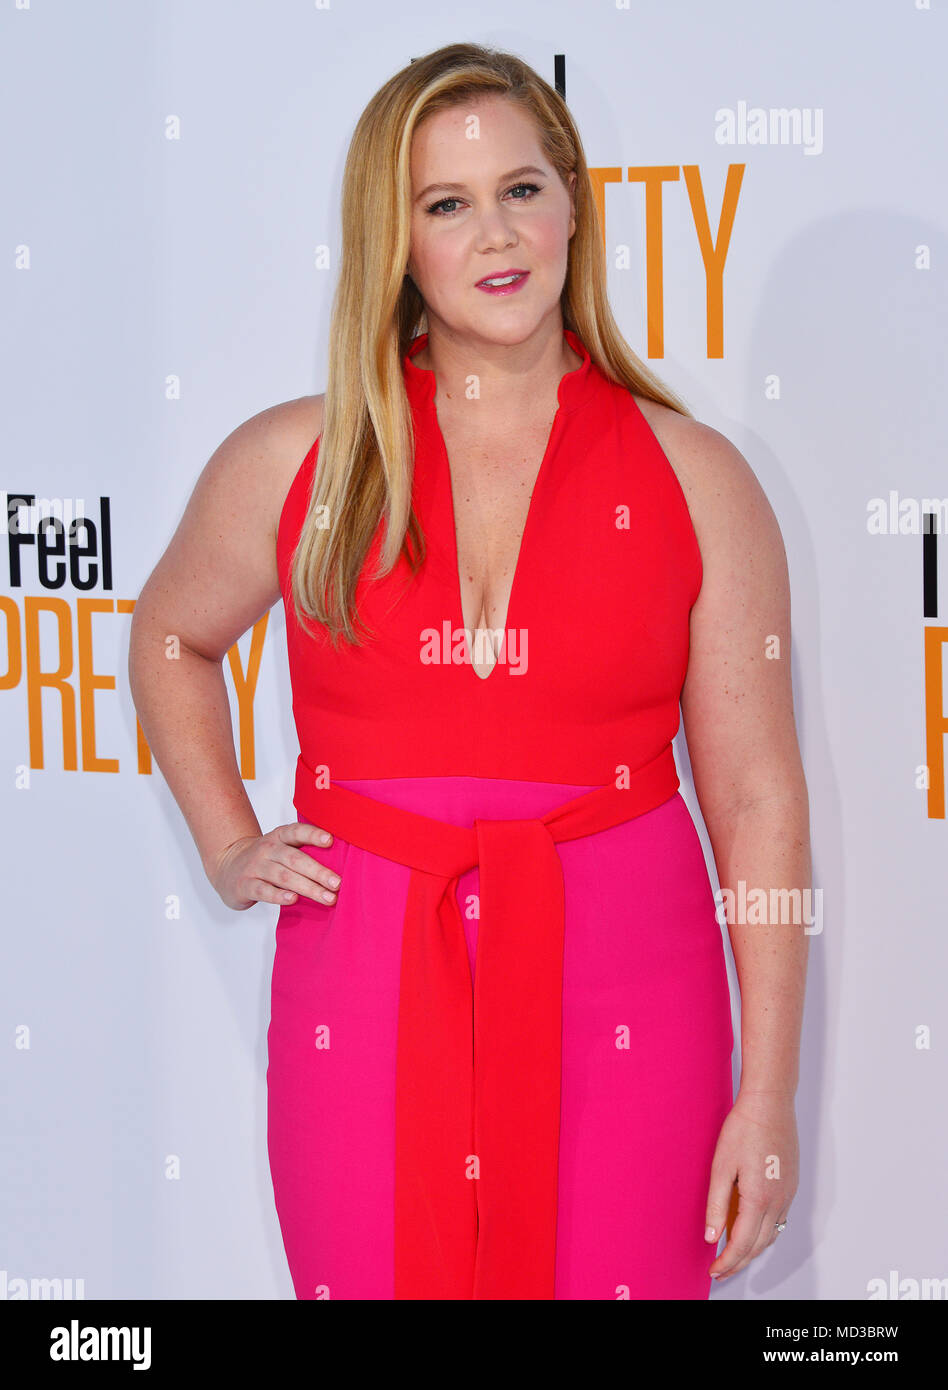 Los Angeles, USA. 17th Apr, 2018. Amy Schumer 146 arrives at the Premiere Of STX Films' 'I Feel Pretty' at Westwood Village Theatre on April 17, 2018 in Westwood, California. Credit: Tsuni / USA/Alamy Live News Stock Photo